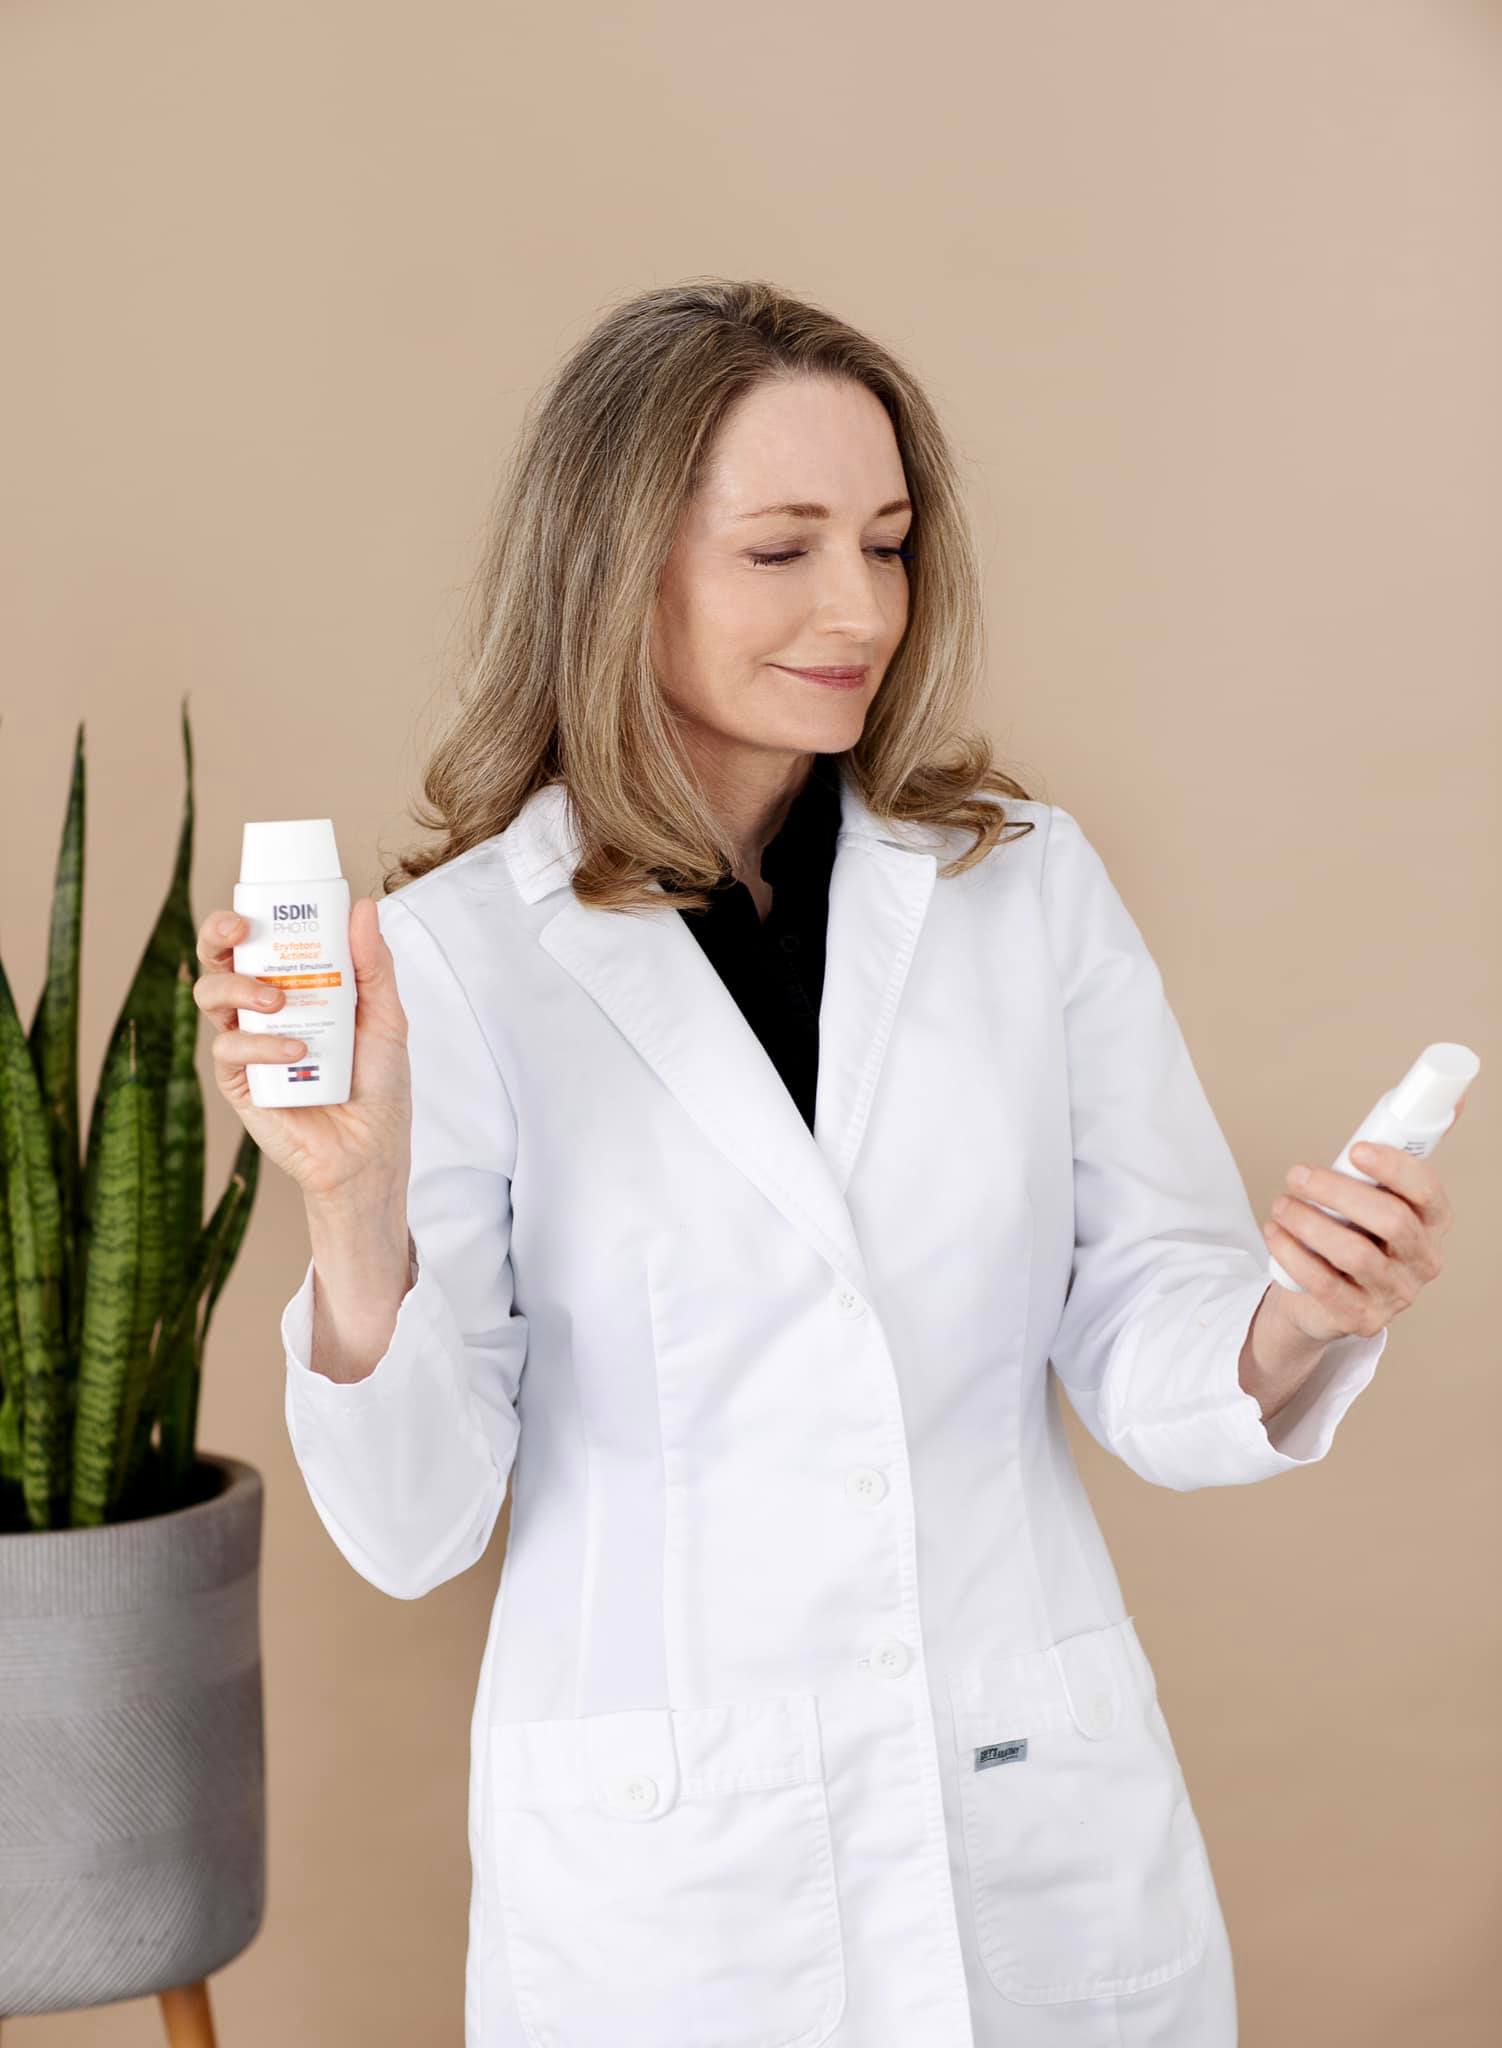 Bev Sidders Skincare -“an engineering/problem-solving” - science-backed skincare products